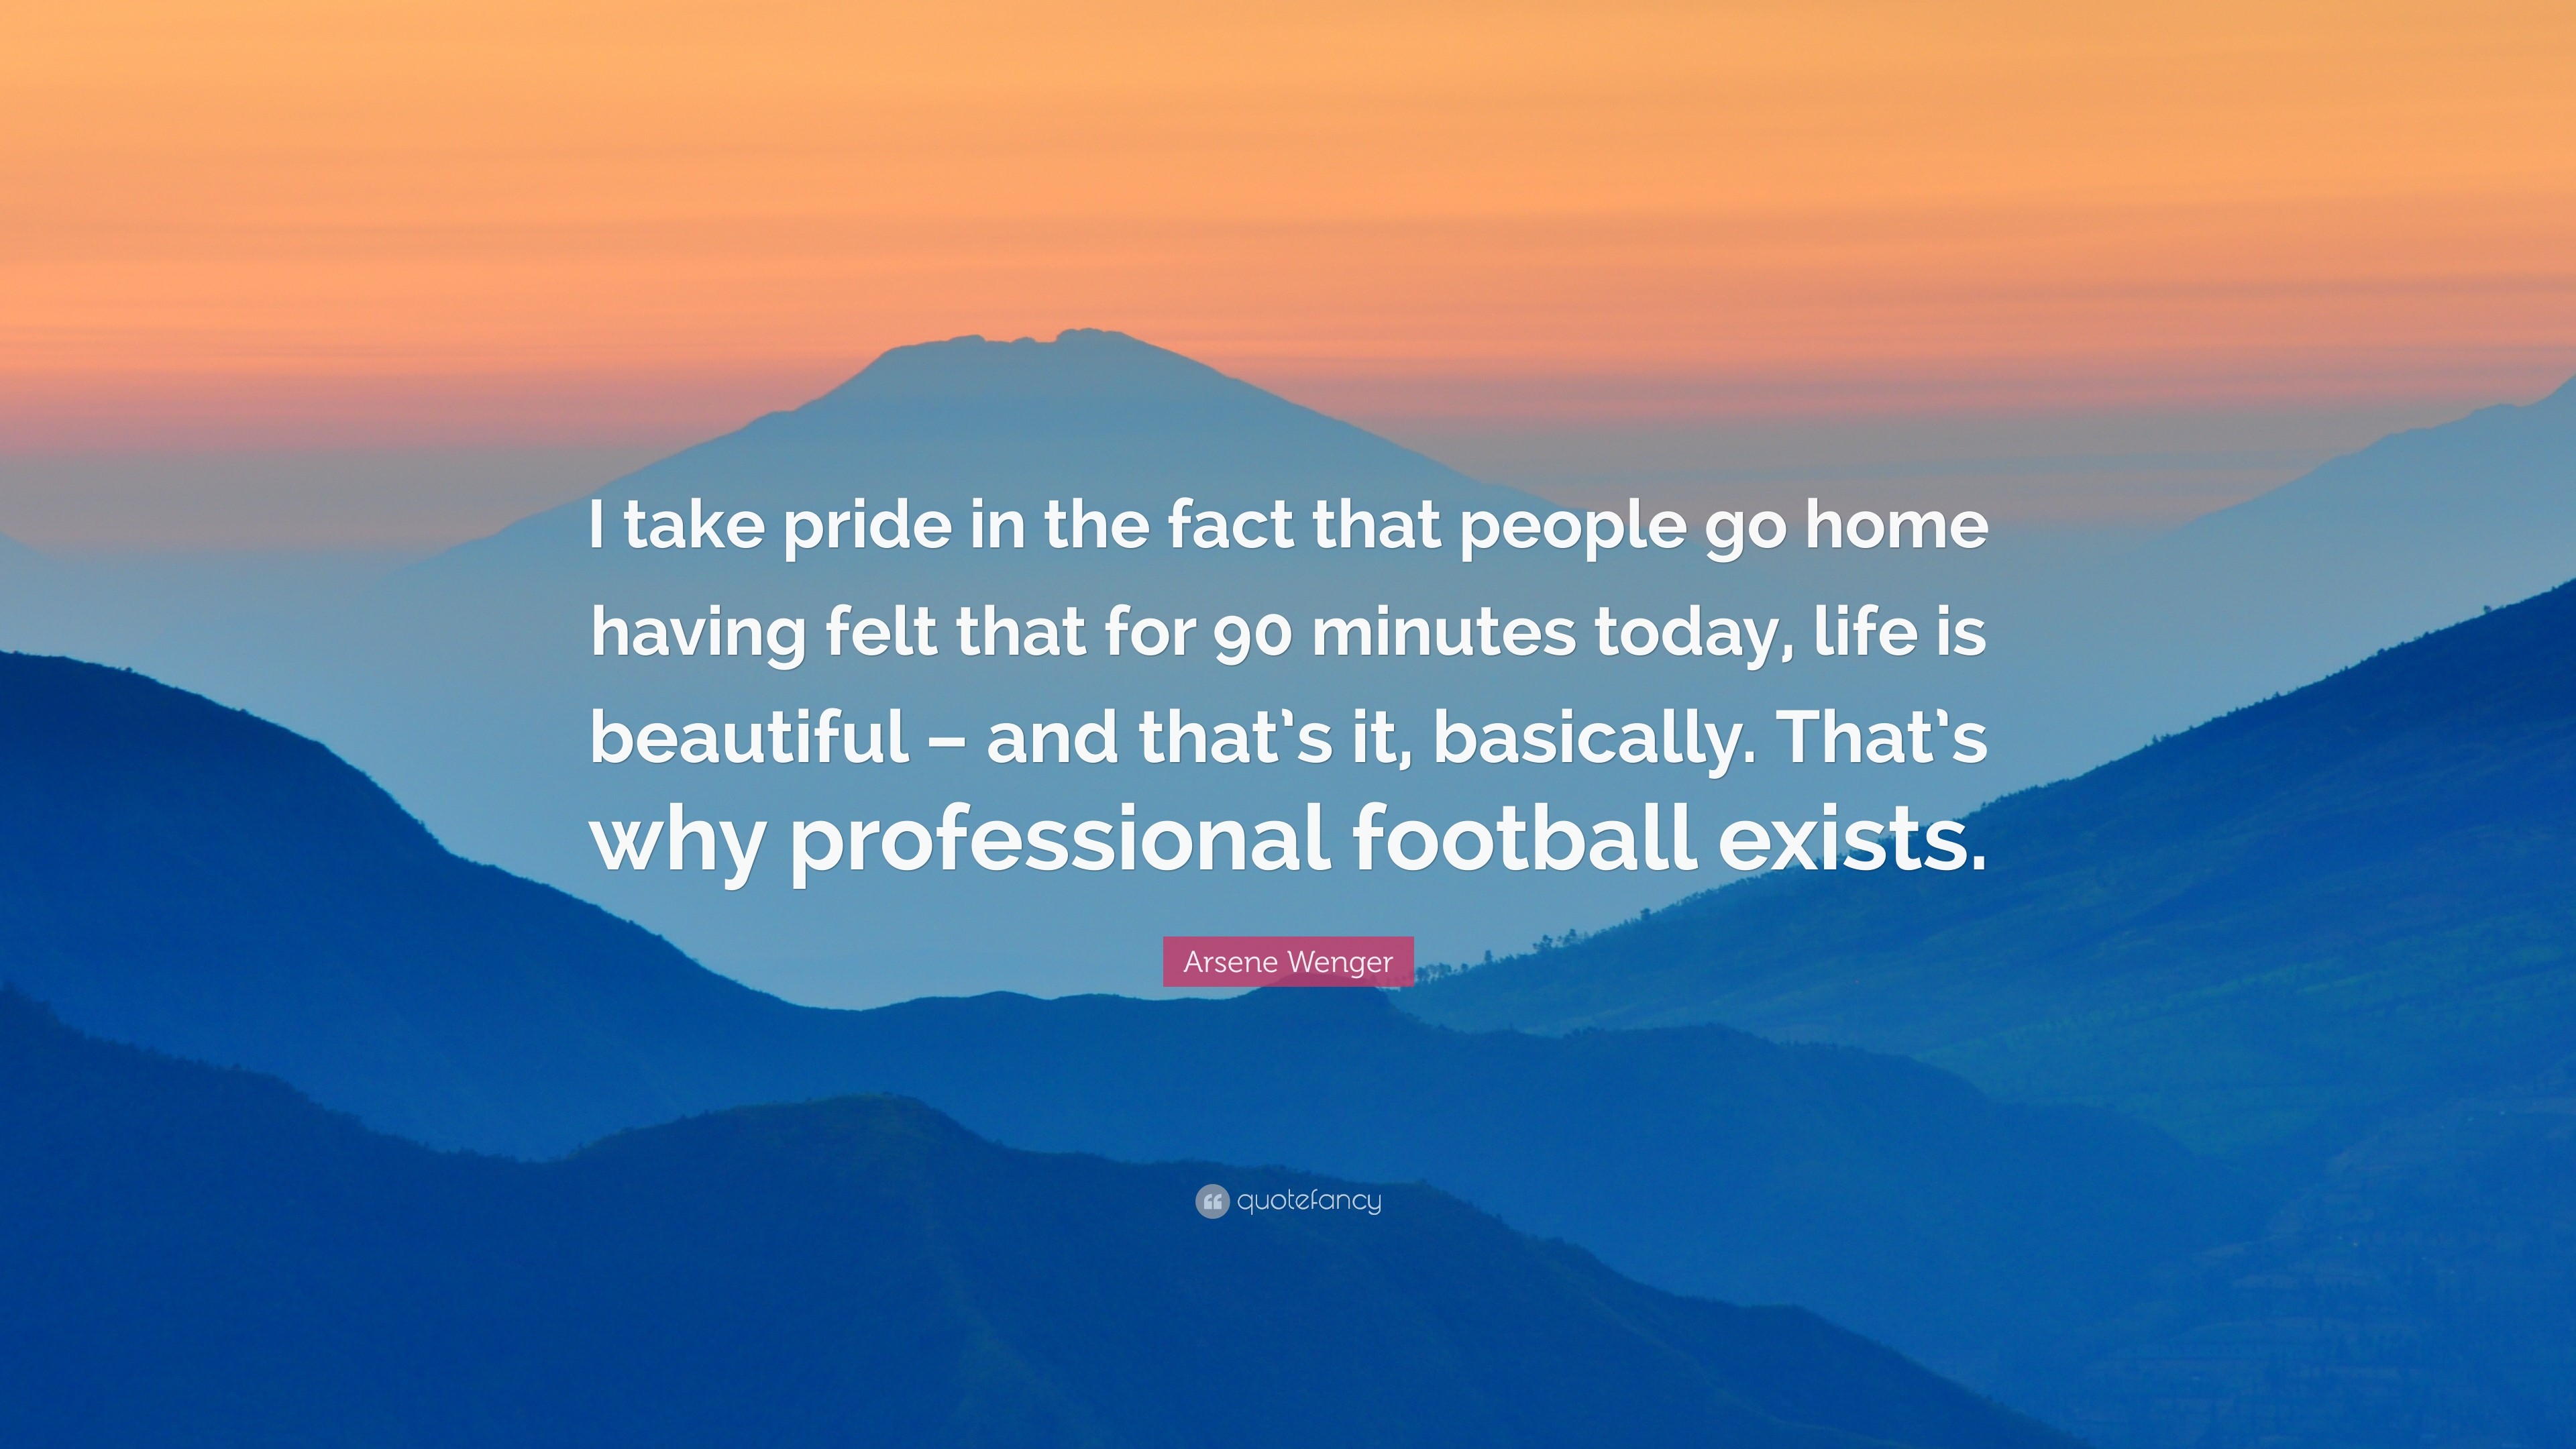 3840x2160 Soccer Quotes: “I take pride in the fact that people go home having felt